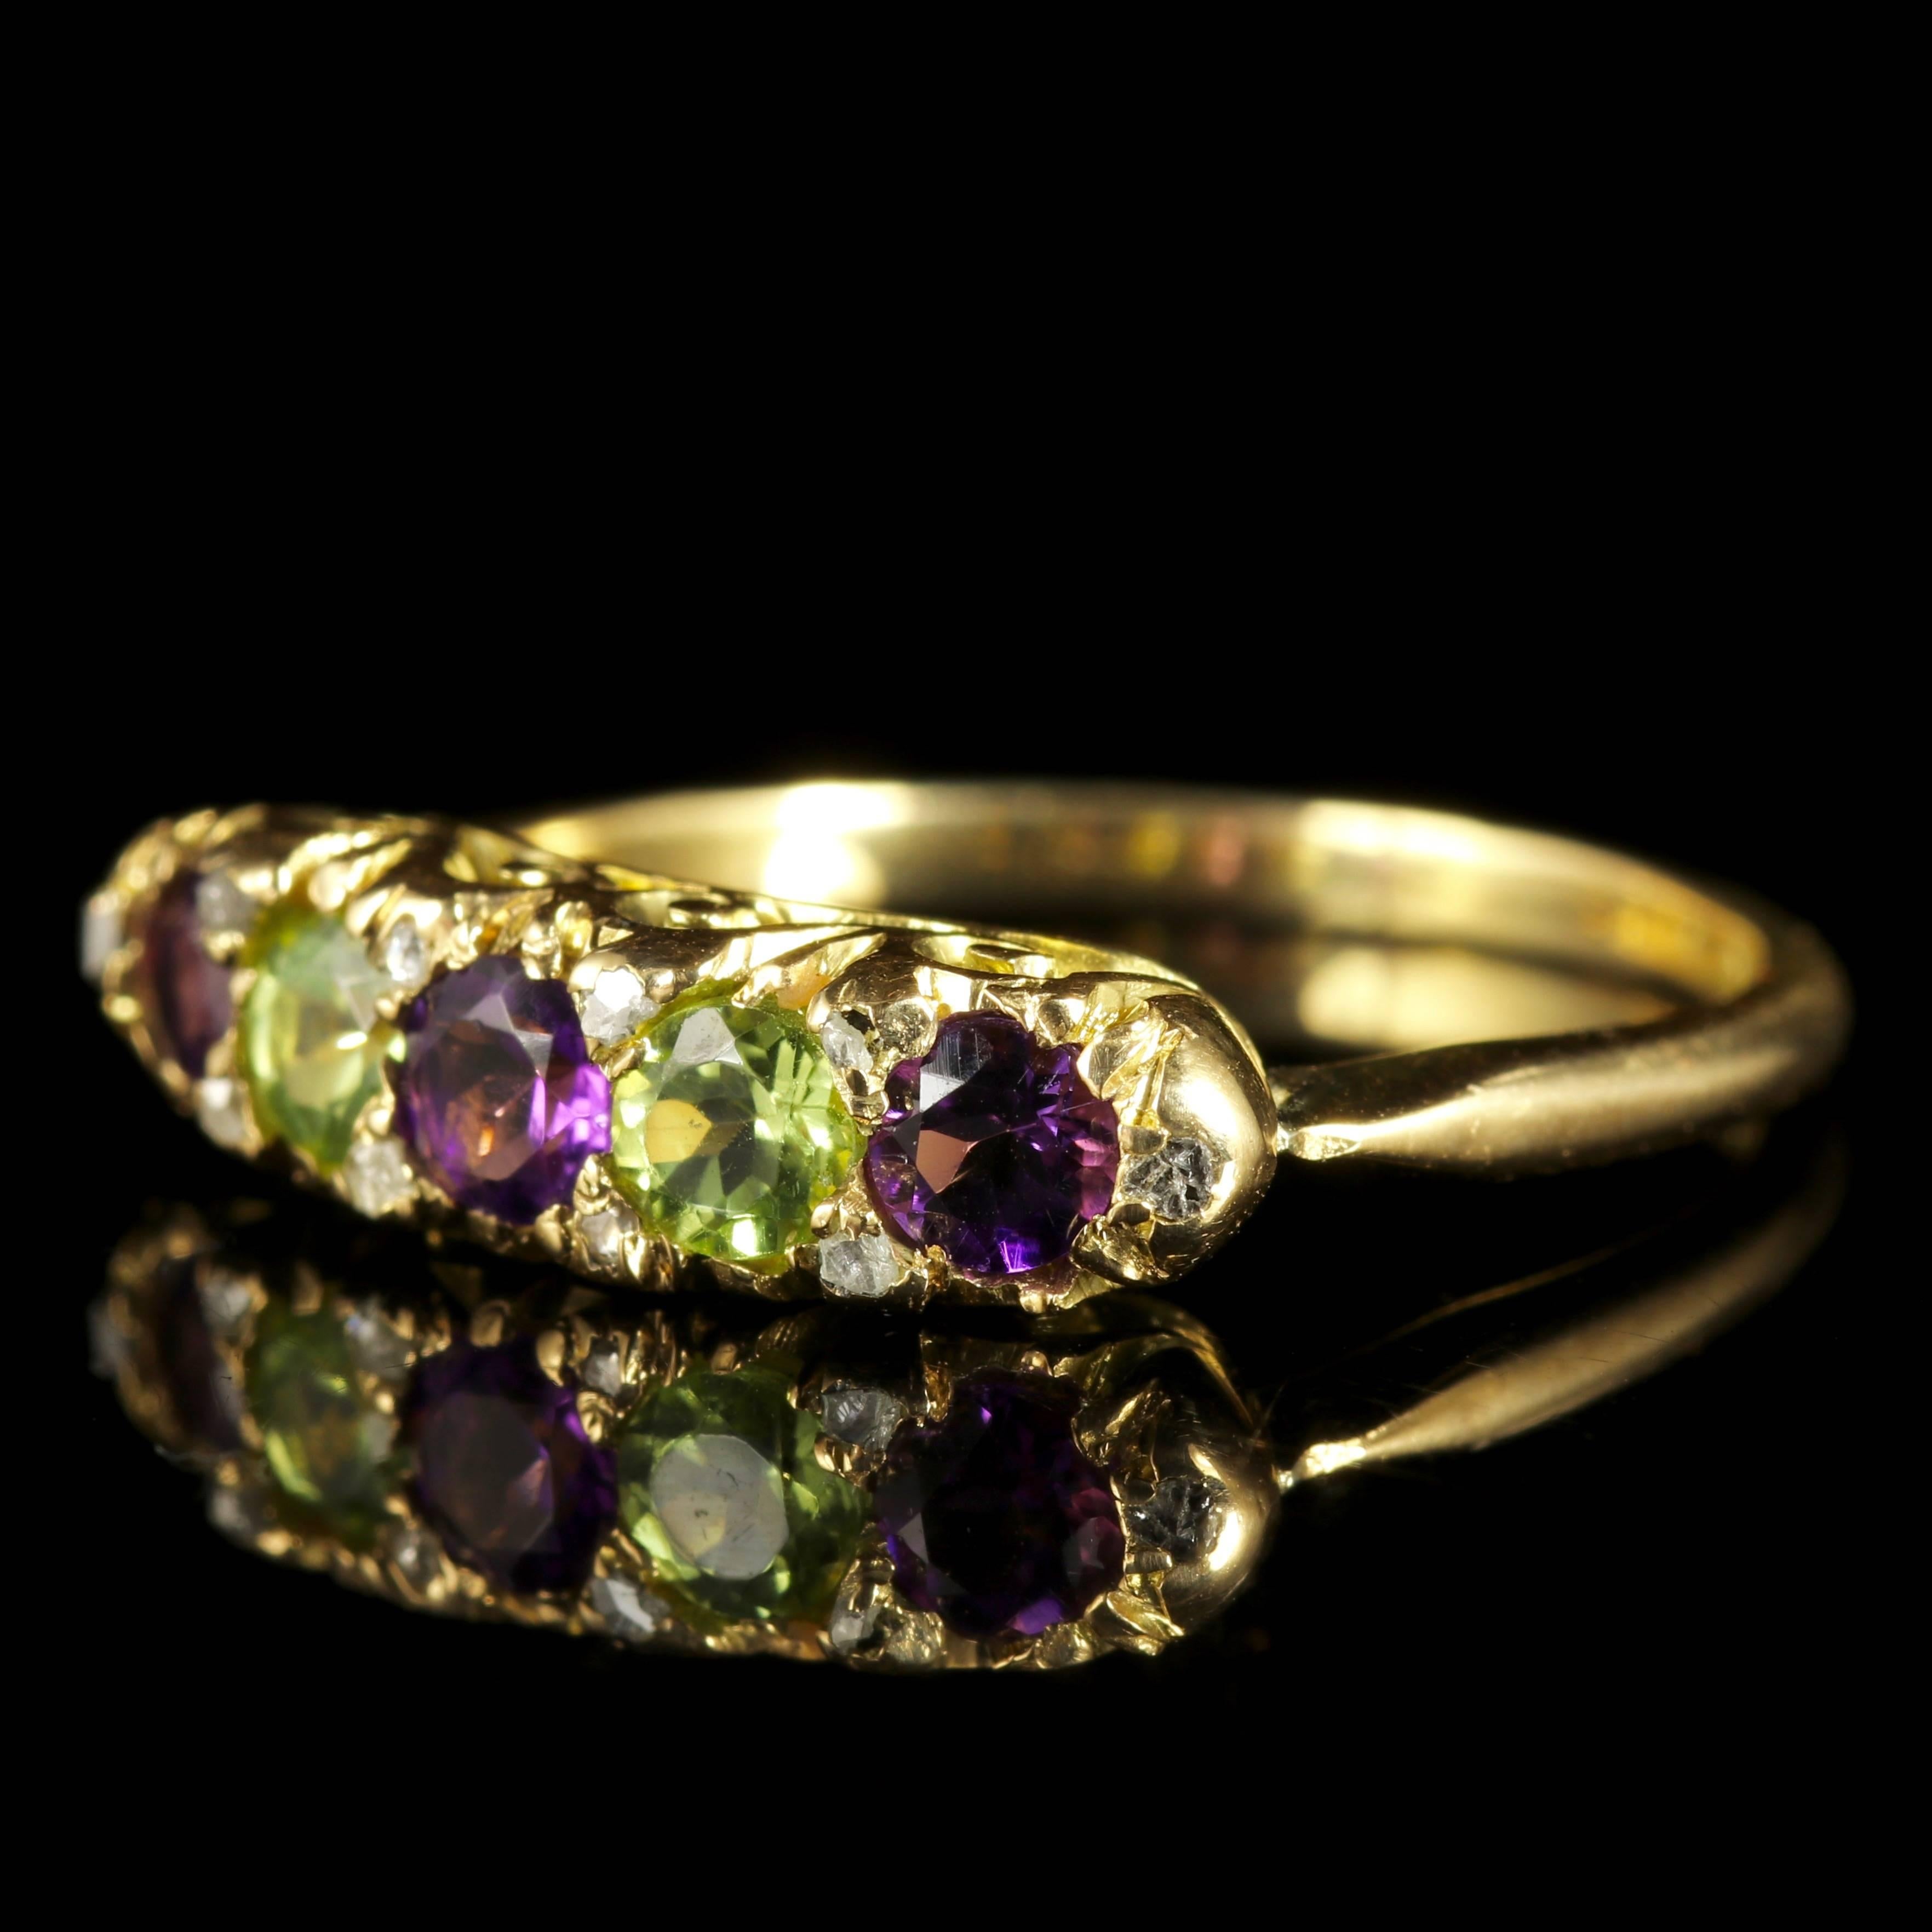 This genuine Victorian 18ct Yellow Gold ring is all original from the Suffragette period, Circa 1900. 

Suffragettes liked to be depicted as feminine, their jewellery was chosen to counter the stereotypes put forward by opponents that they were